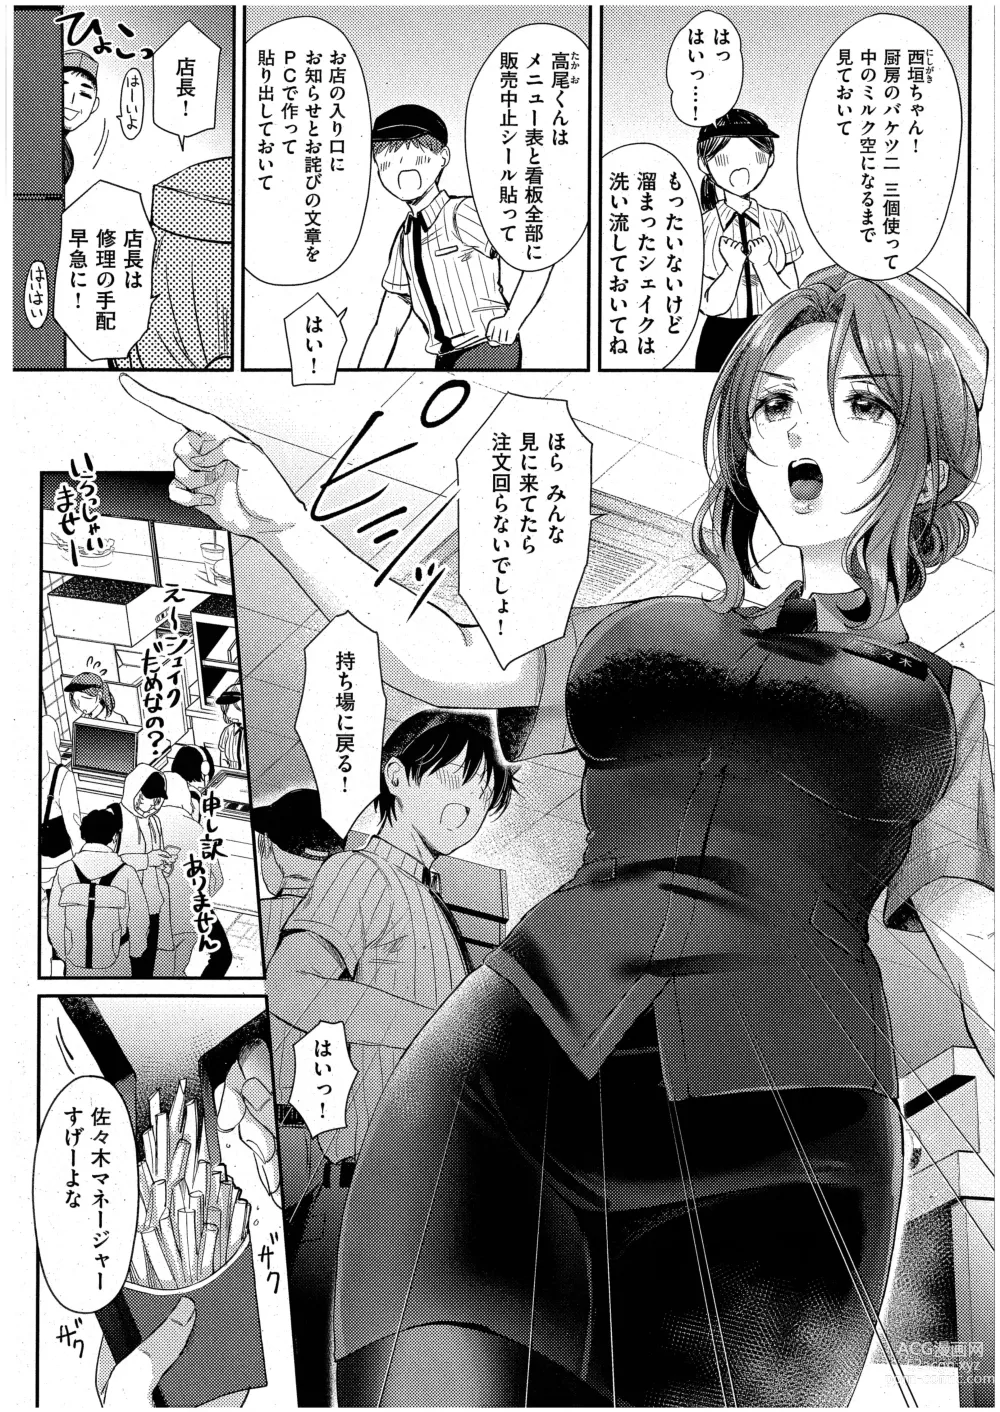 Page 3 of manga Eat in Take Out Zenpen